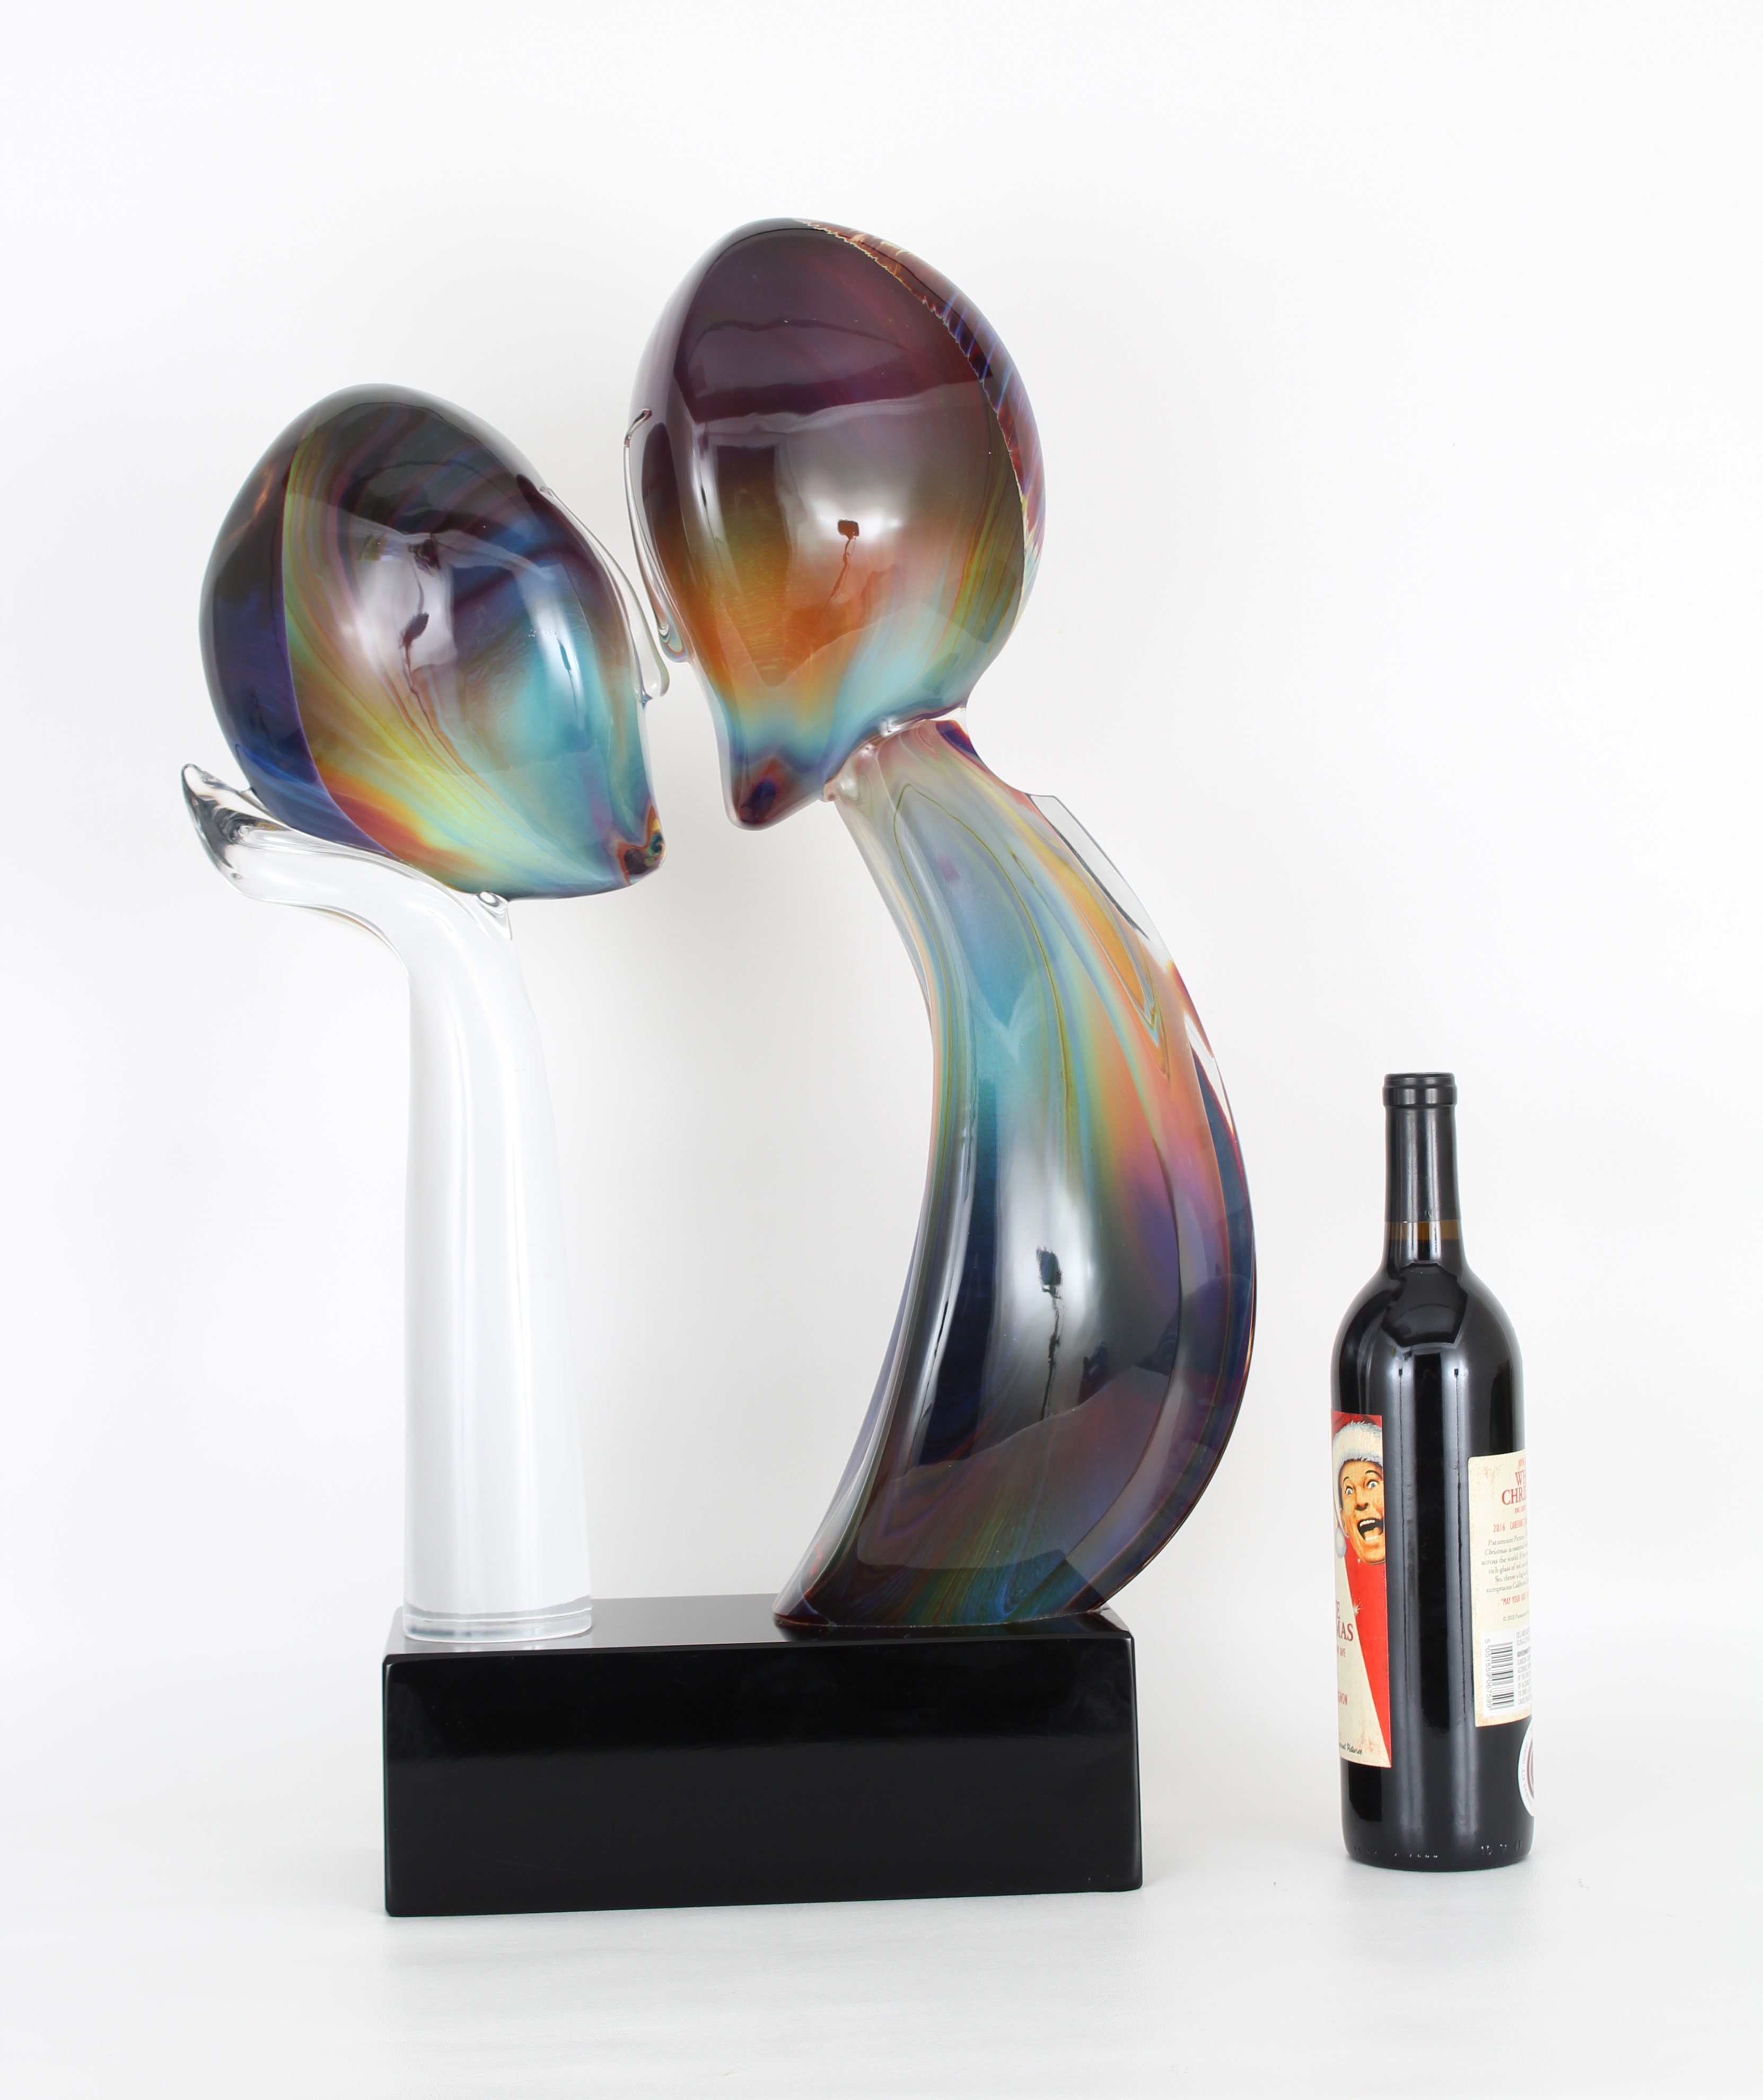 Dino Rosin "The Kiss" Glass Sculpture - Image 2 of 9